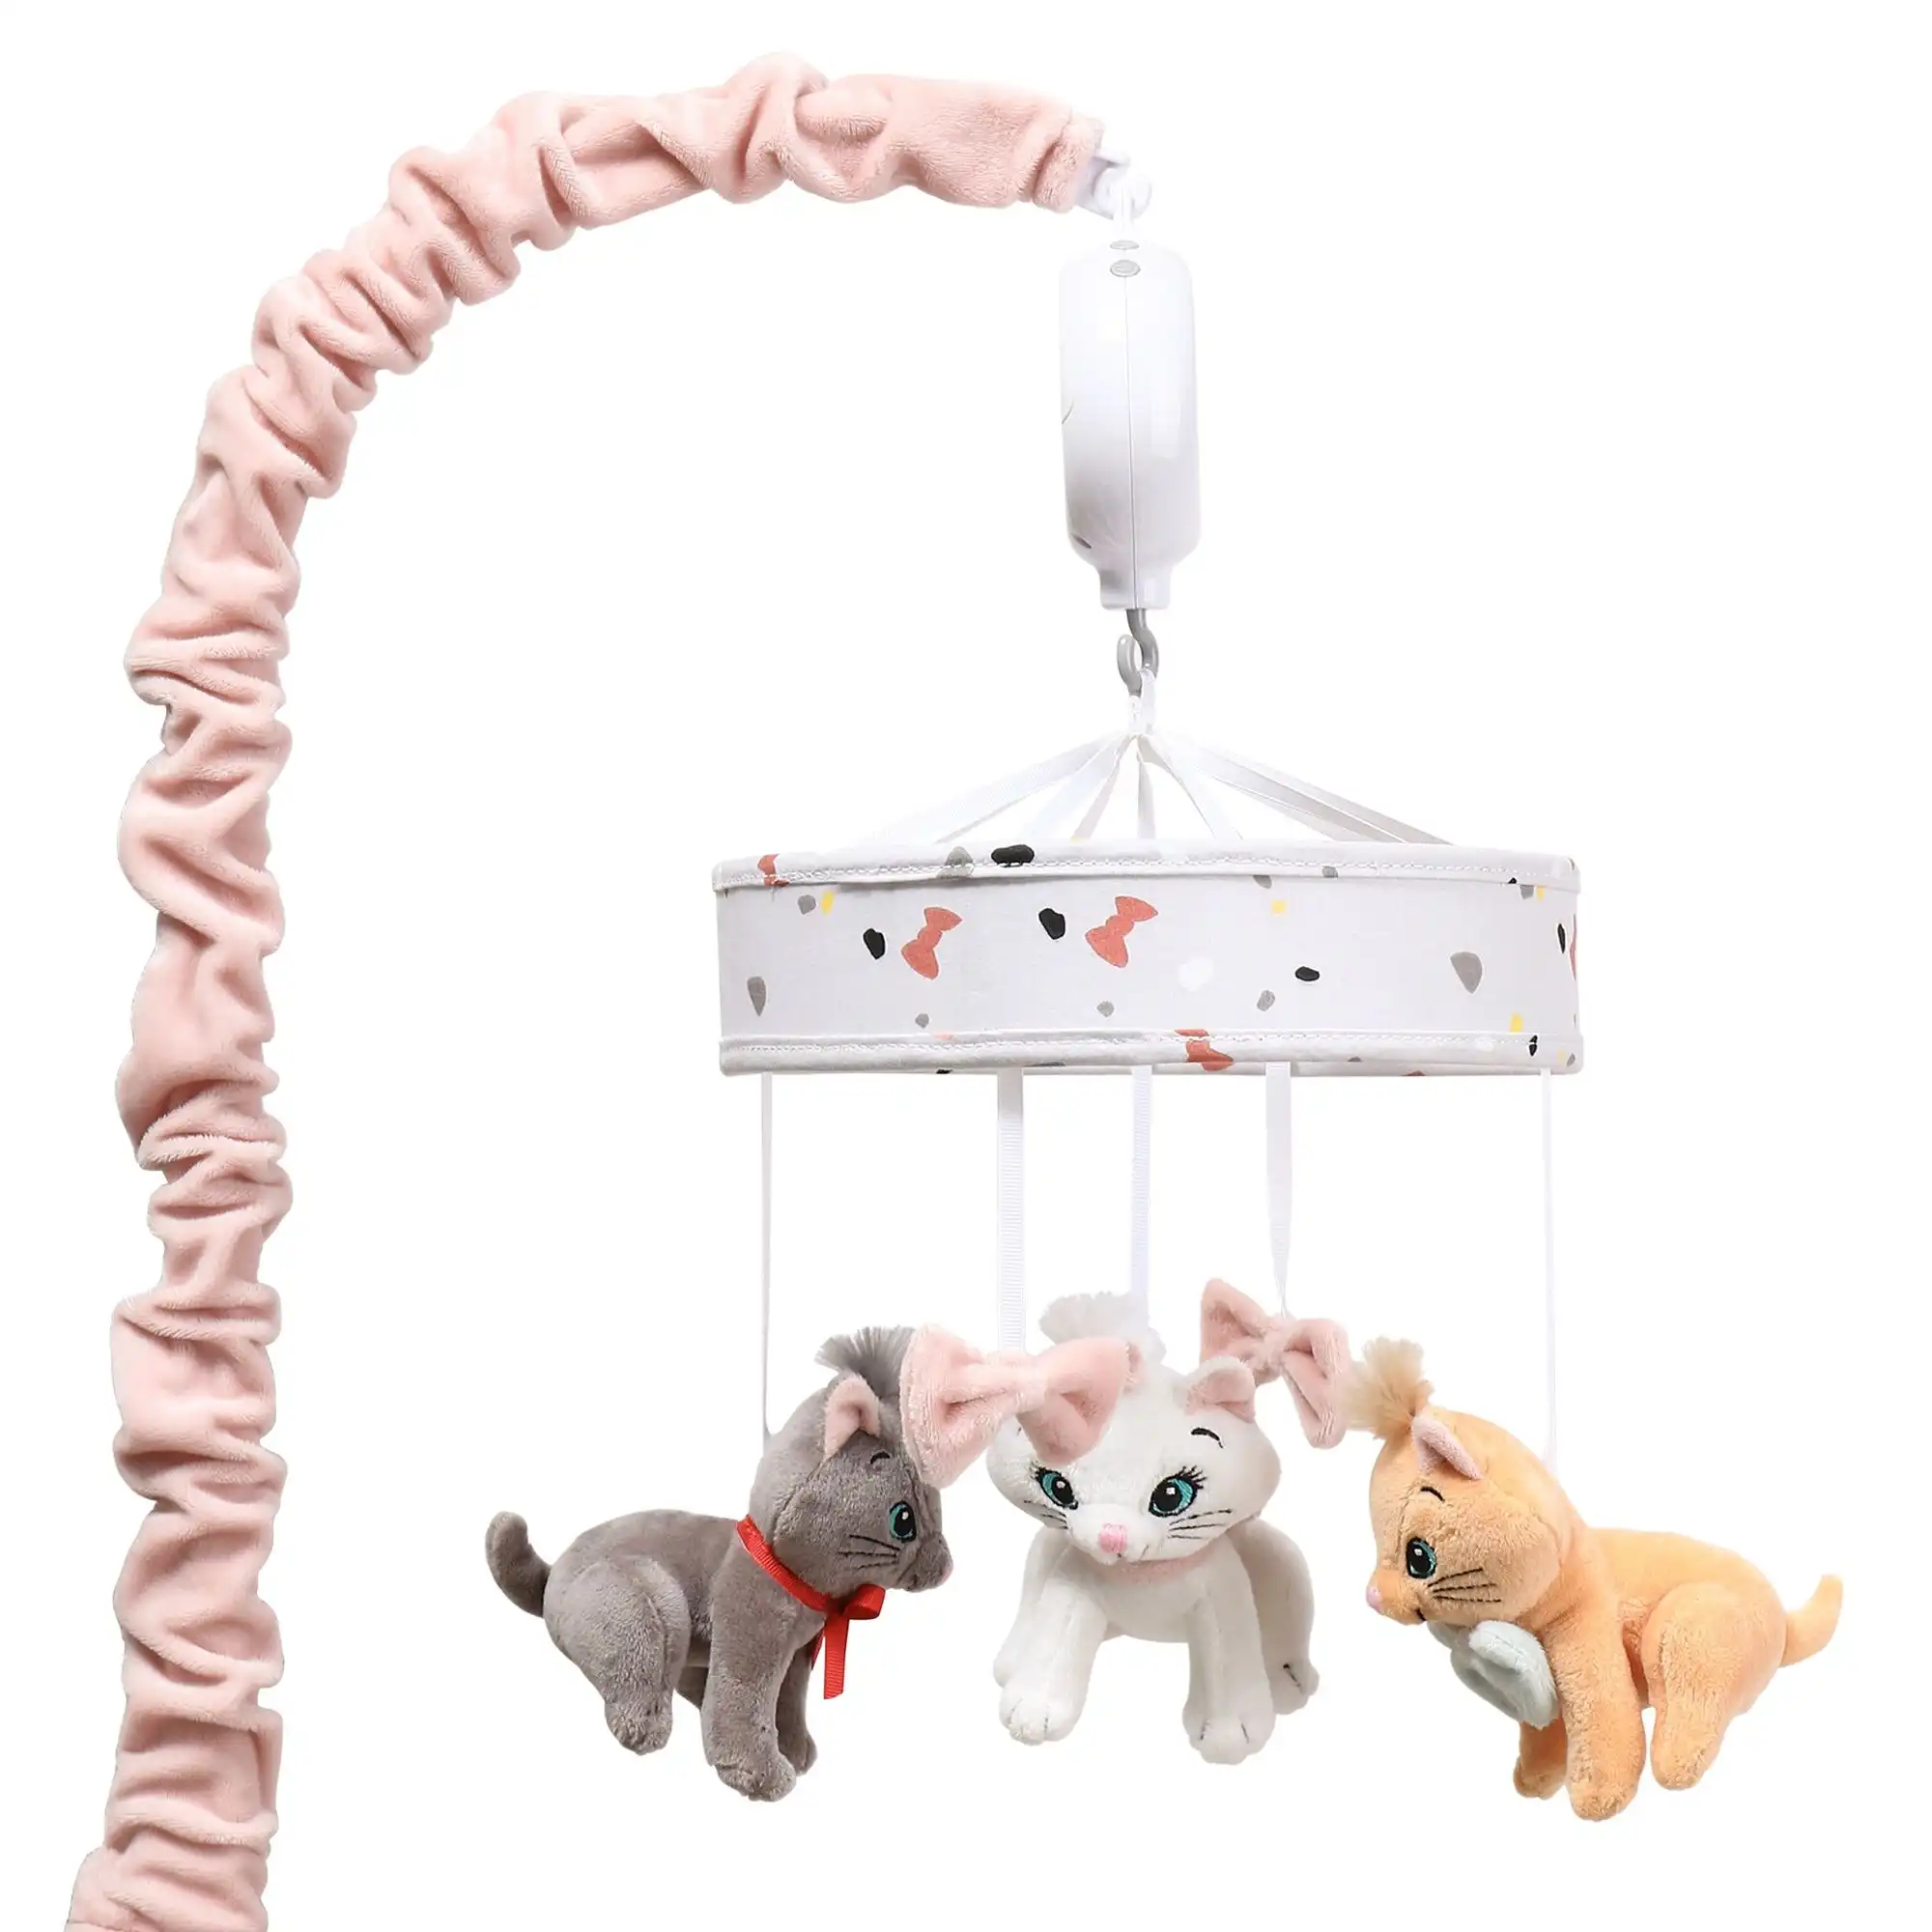 Disney Baby Aristocats Musical Mobile